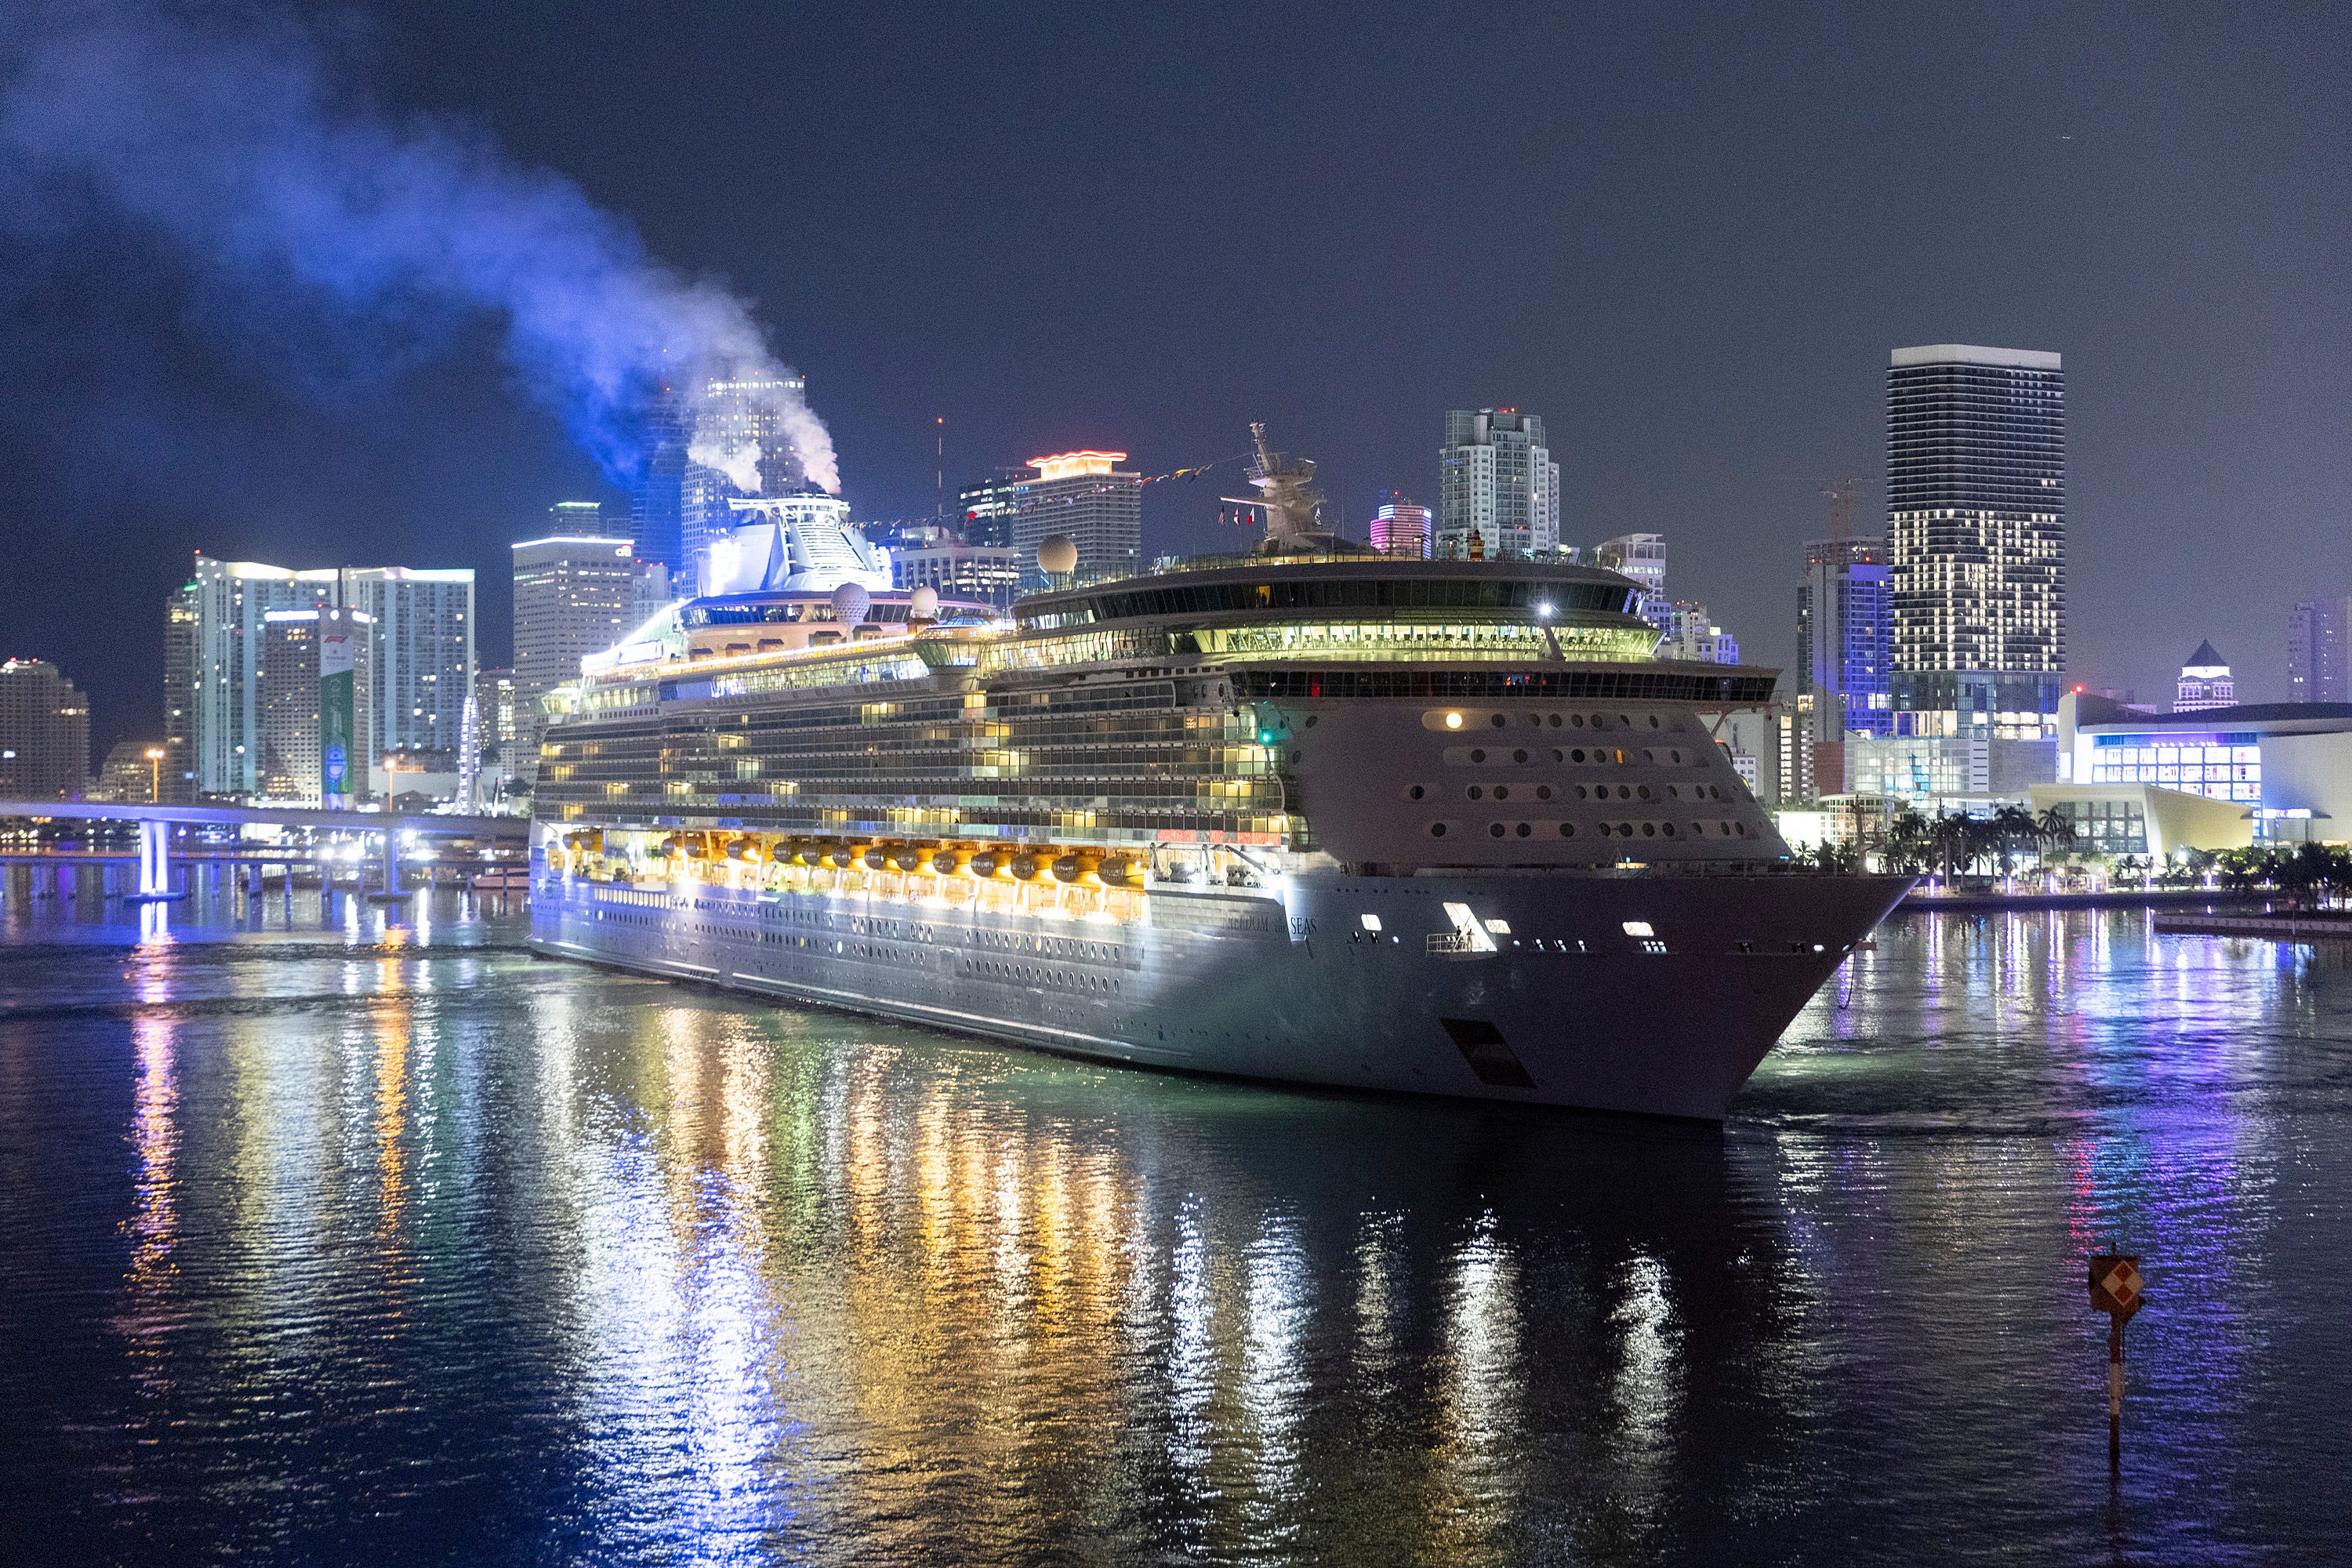 Cruises are a popular place for